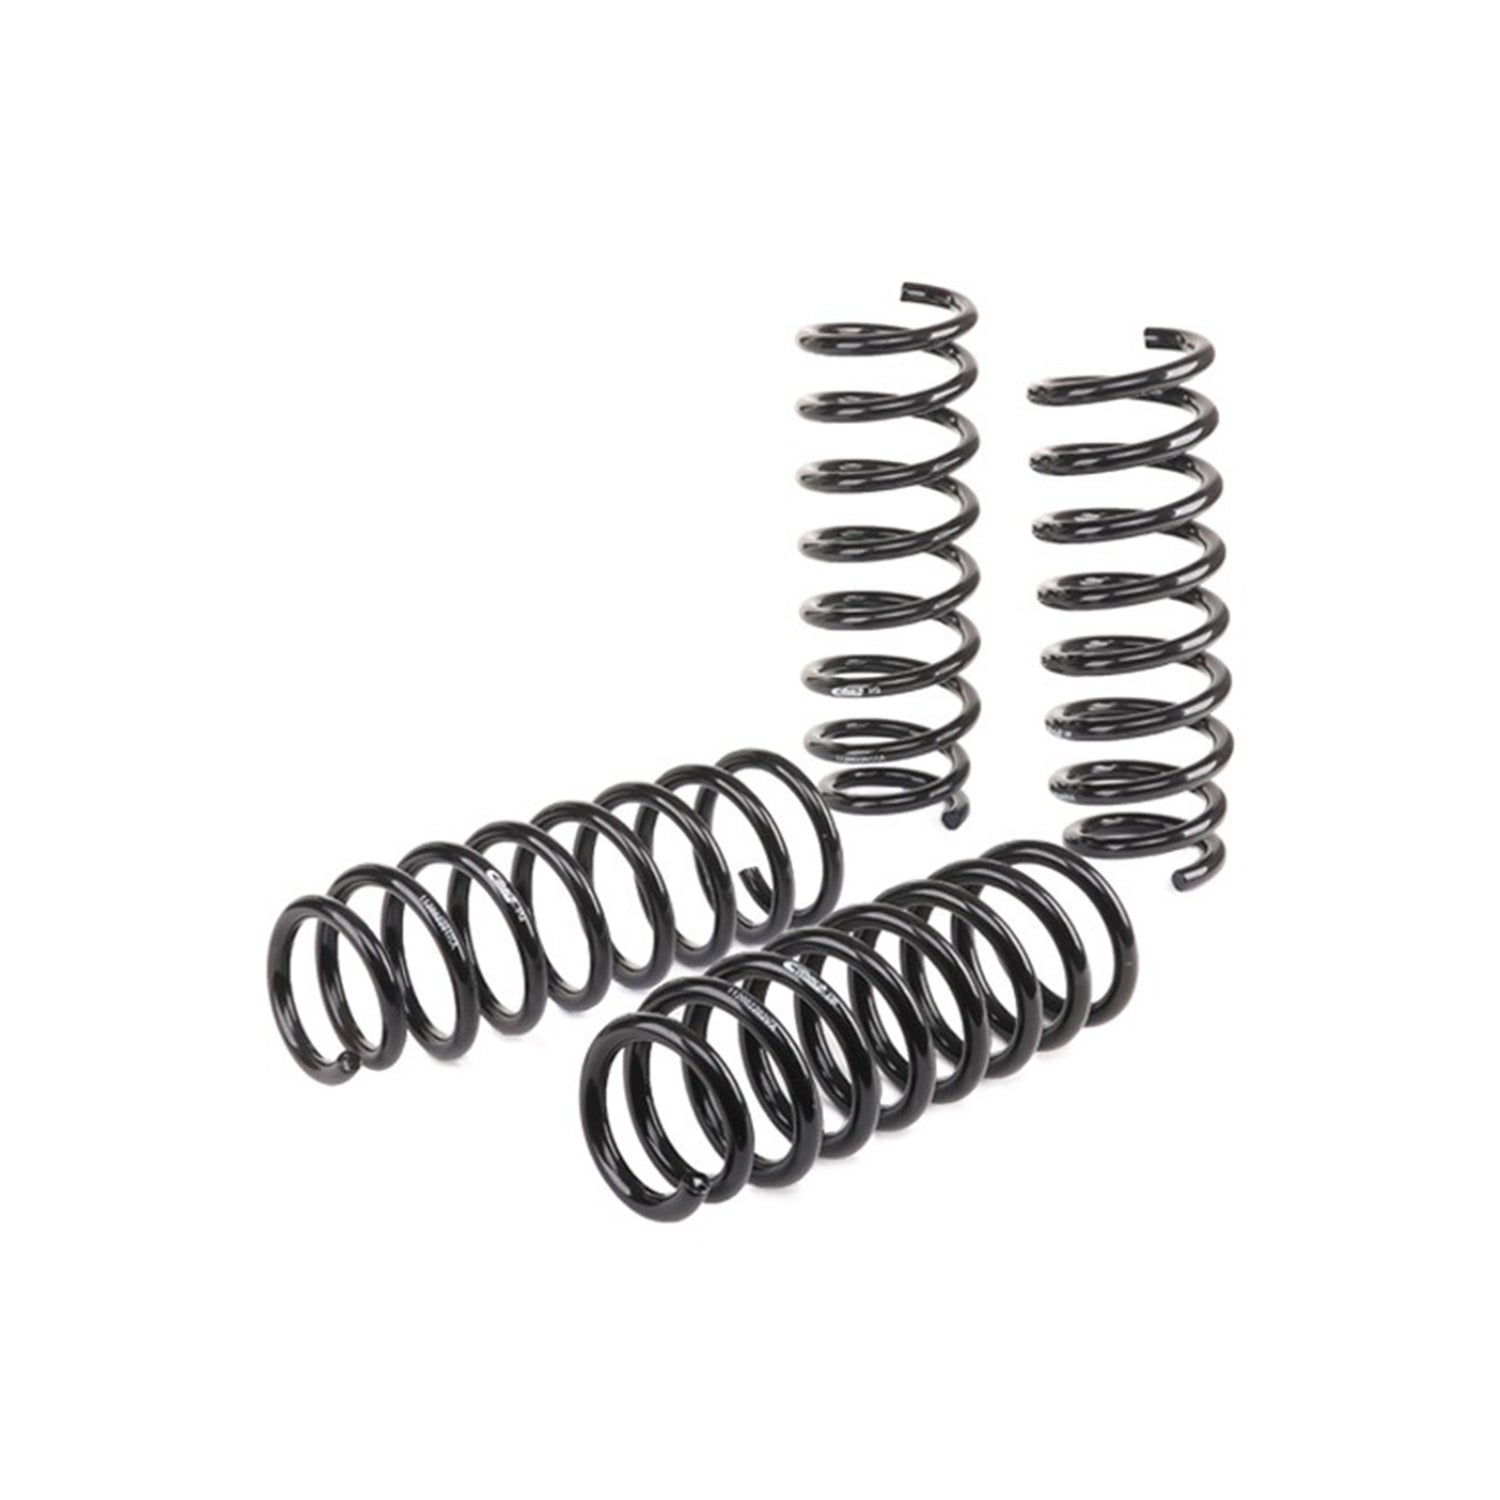 Eibach Pro Kit Lowering Springs For Audi RS3 8Y & 8V